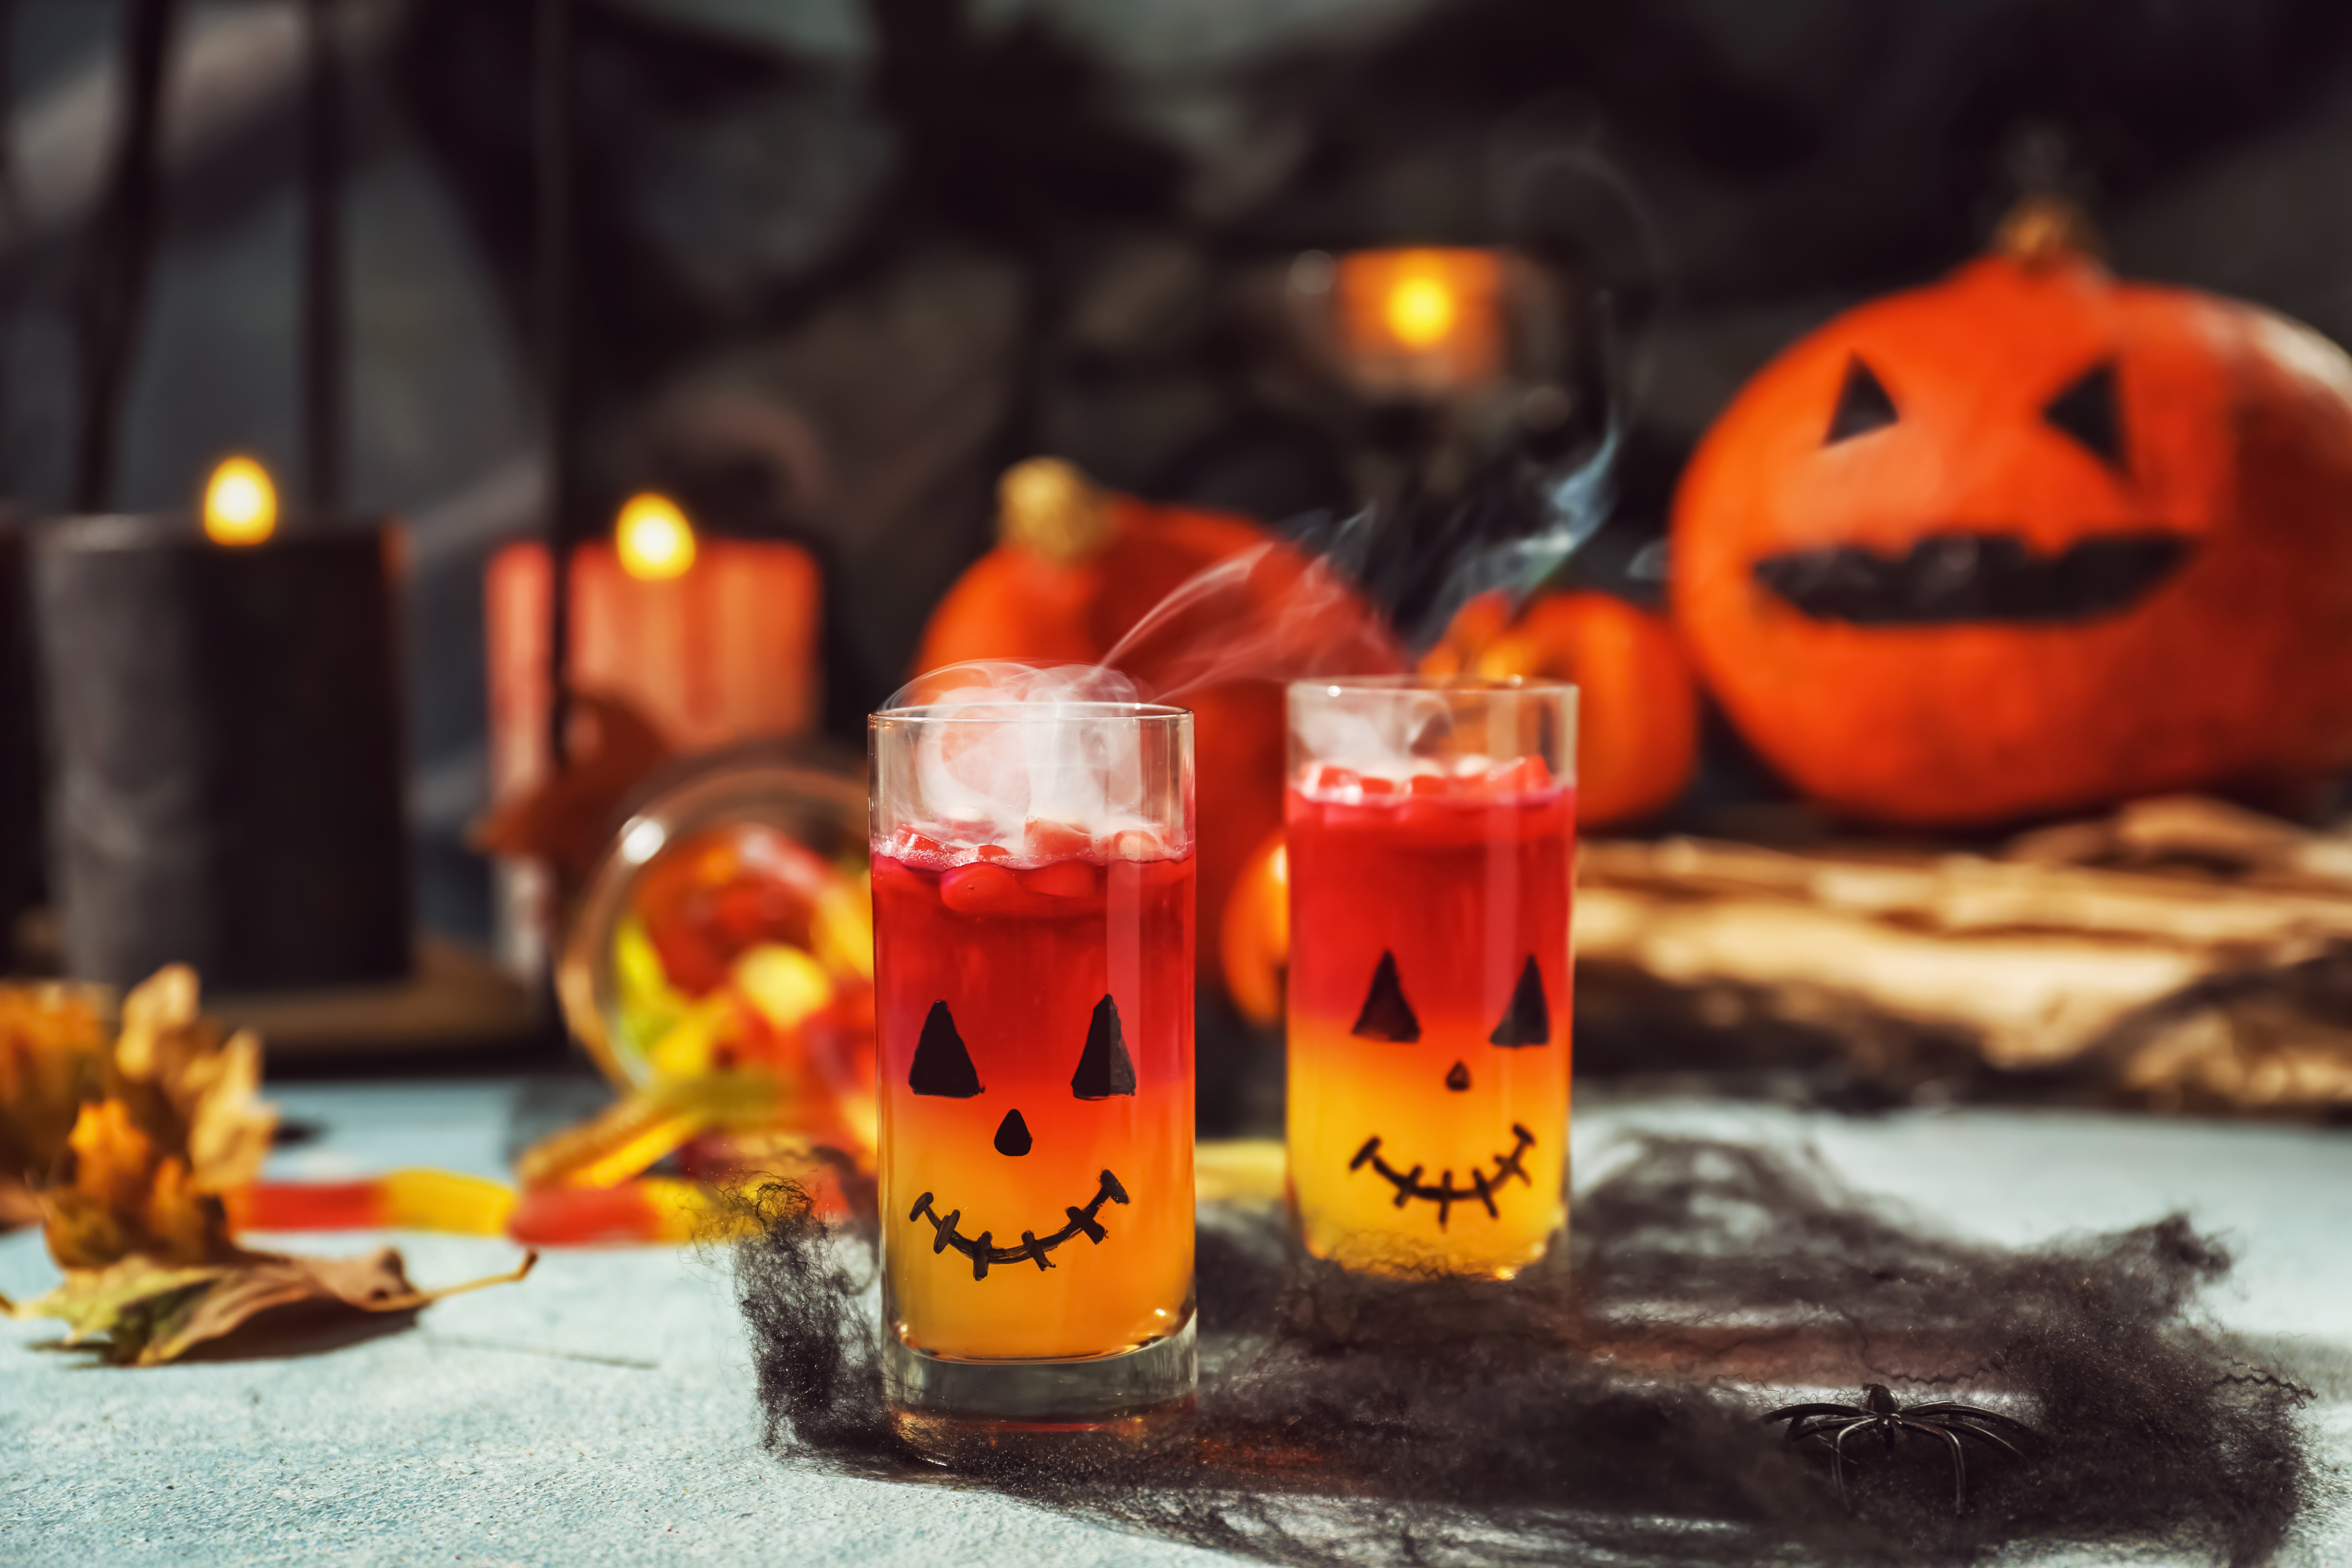 Be Scary & Merry with these Halloween Party Ideas!